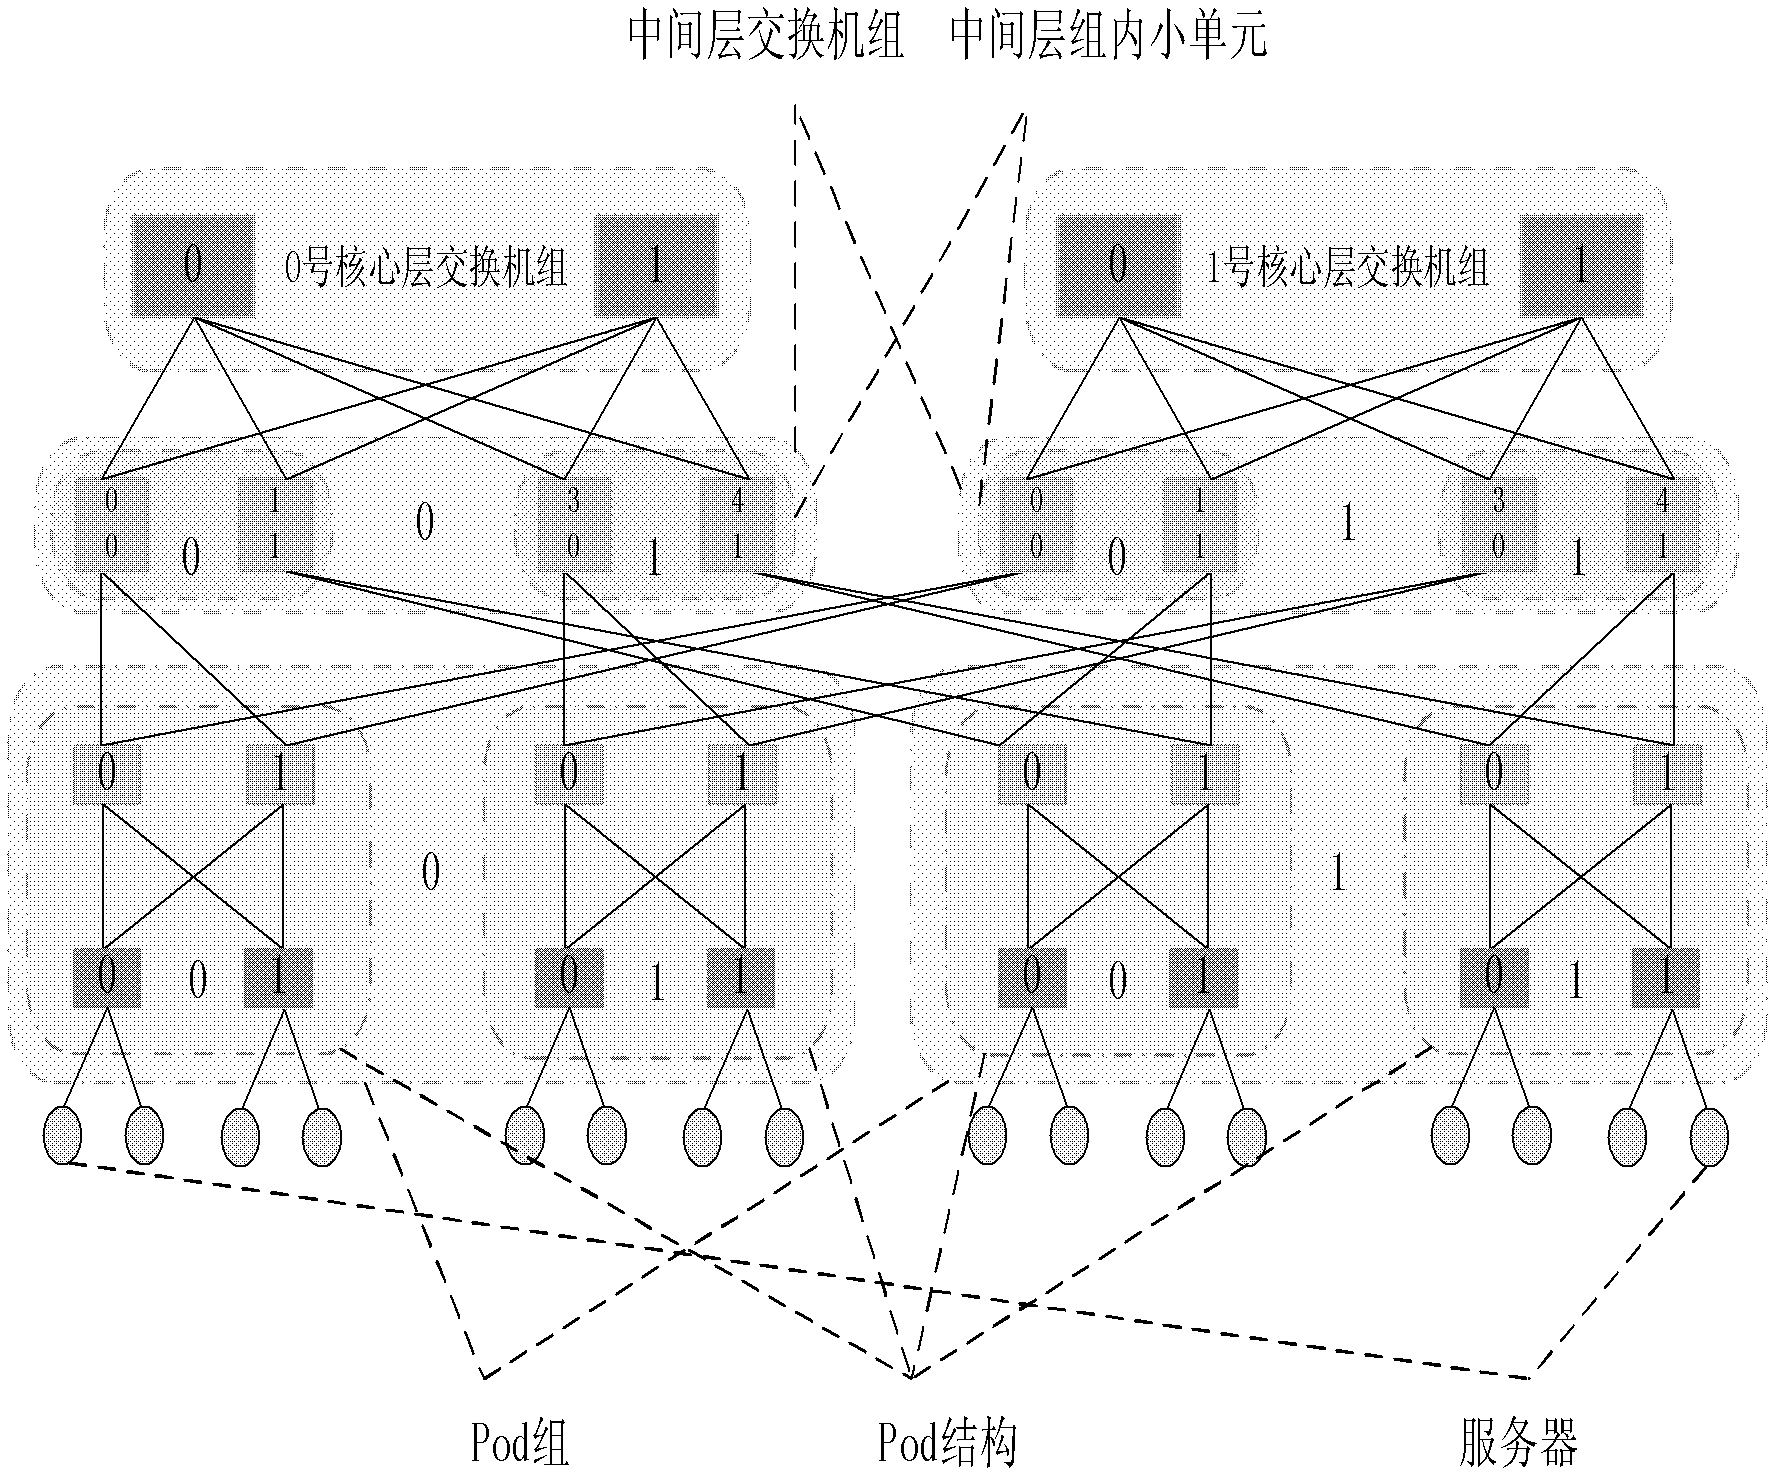 Data center network topology system based on module expansion